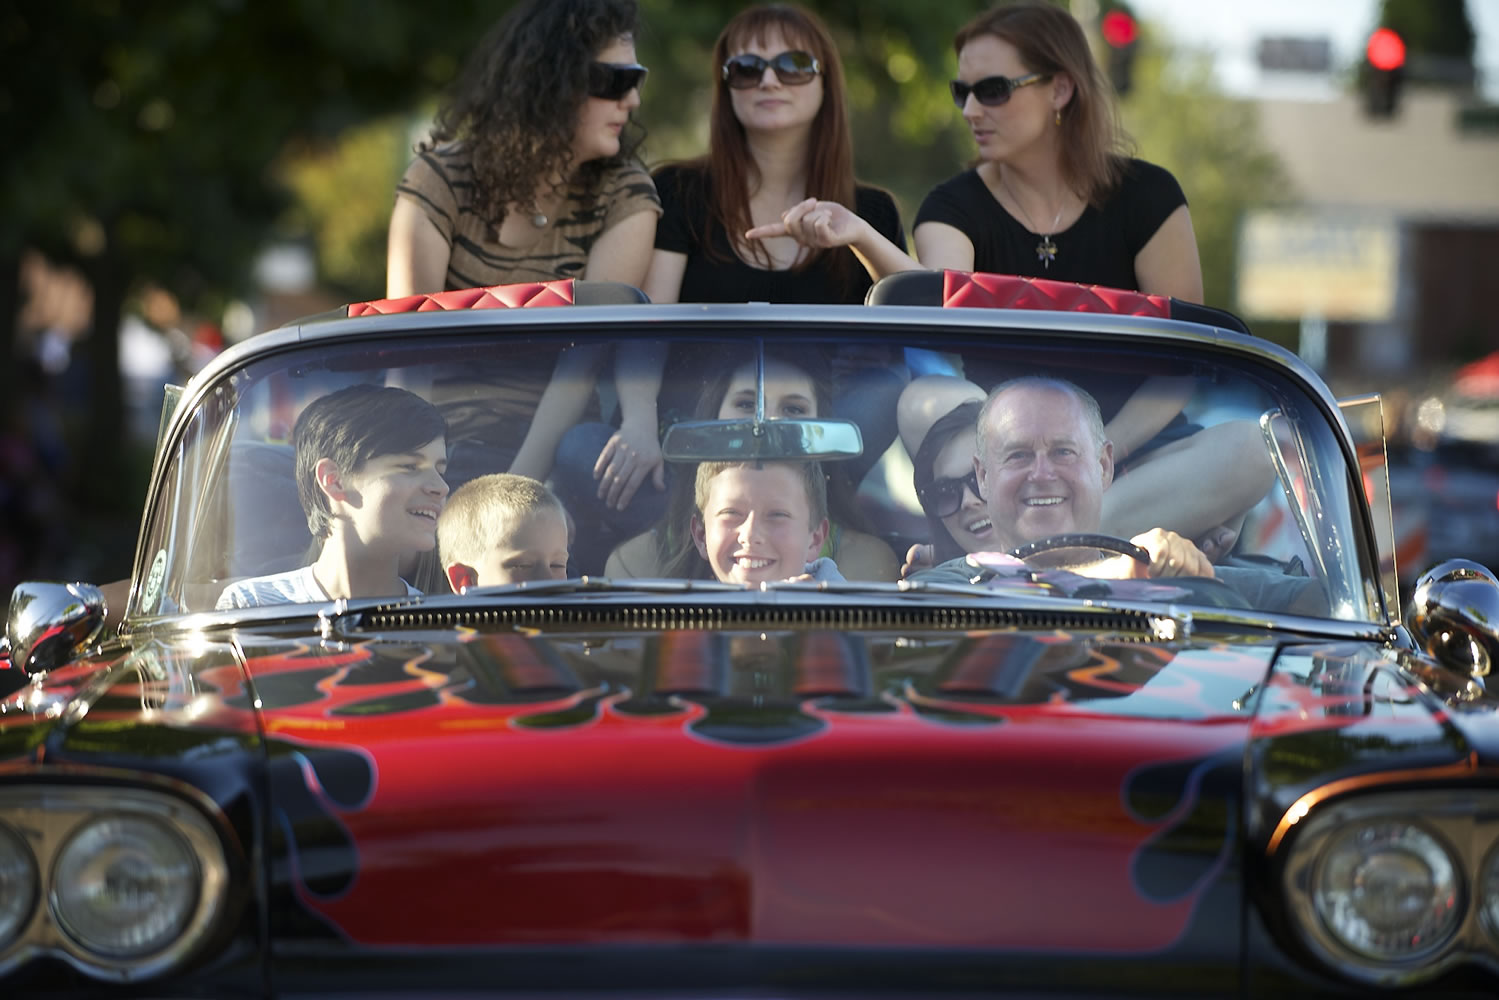 Andrew Scott, 11, from left in the front seat, Andrew Allen, 8, Garret Cochran, 12, and driver Terry Krebser -- plus some passengers Krebser didn't know -- enjoy a ride in his 1958 Chevy Impala on Saturday at the fifth annual Cruisin' the Gut along Main Street in Vancouver.